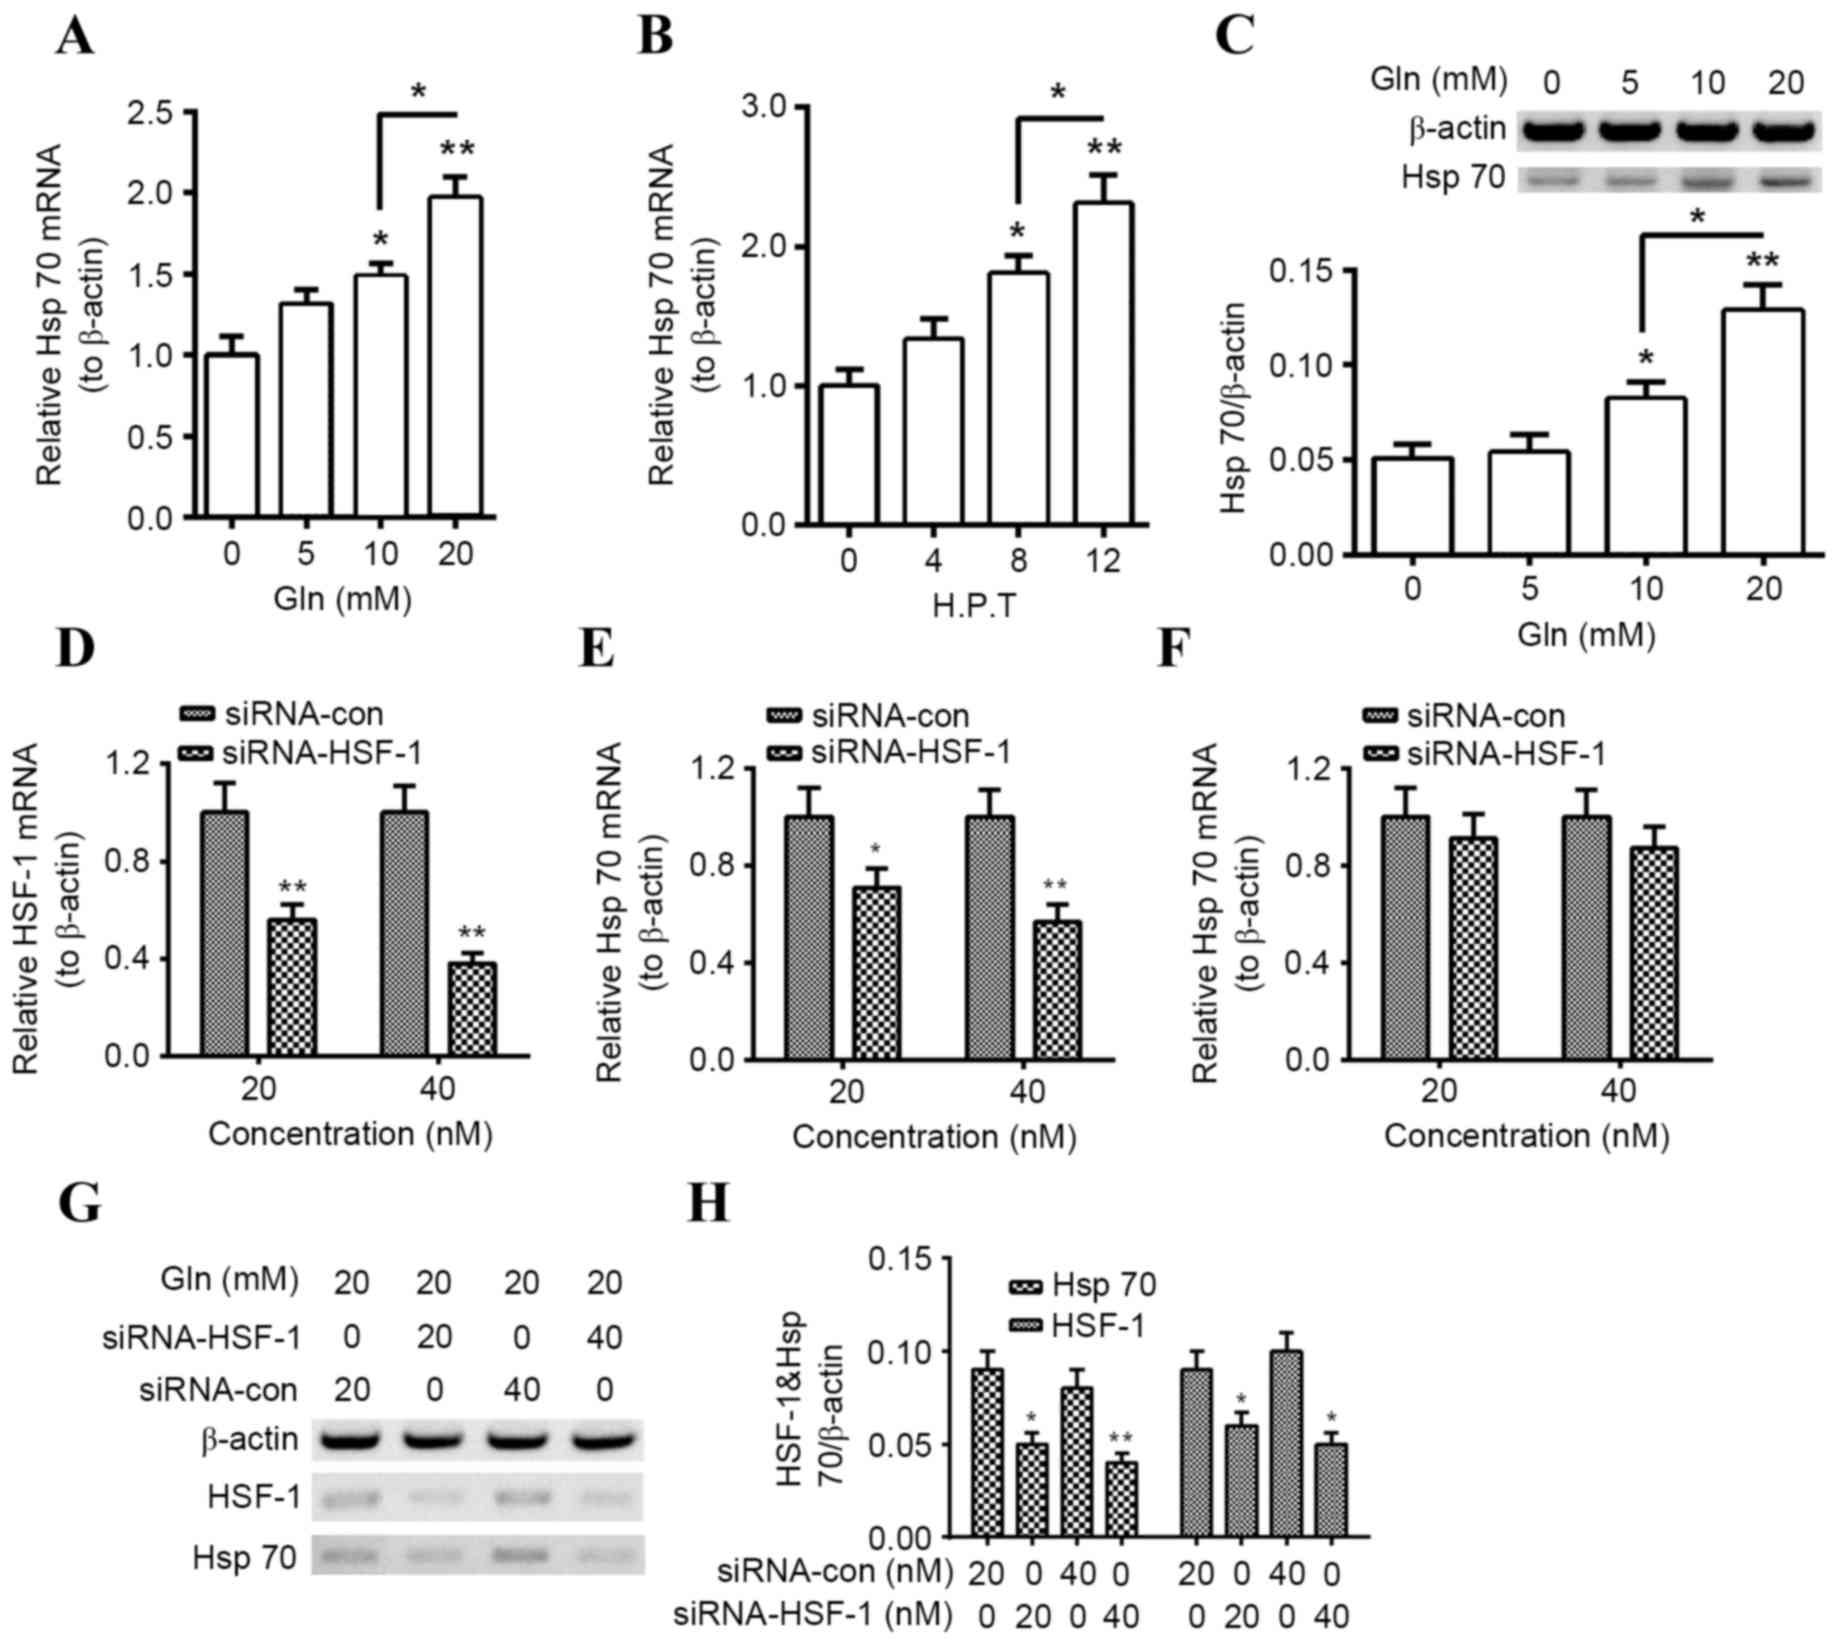 Glutamine Promotes Hsp70 And Inhibits A Synuclein Accumulation In Pheochromocytoma Pc12 Cells